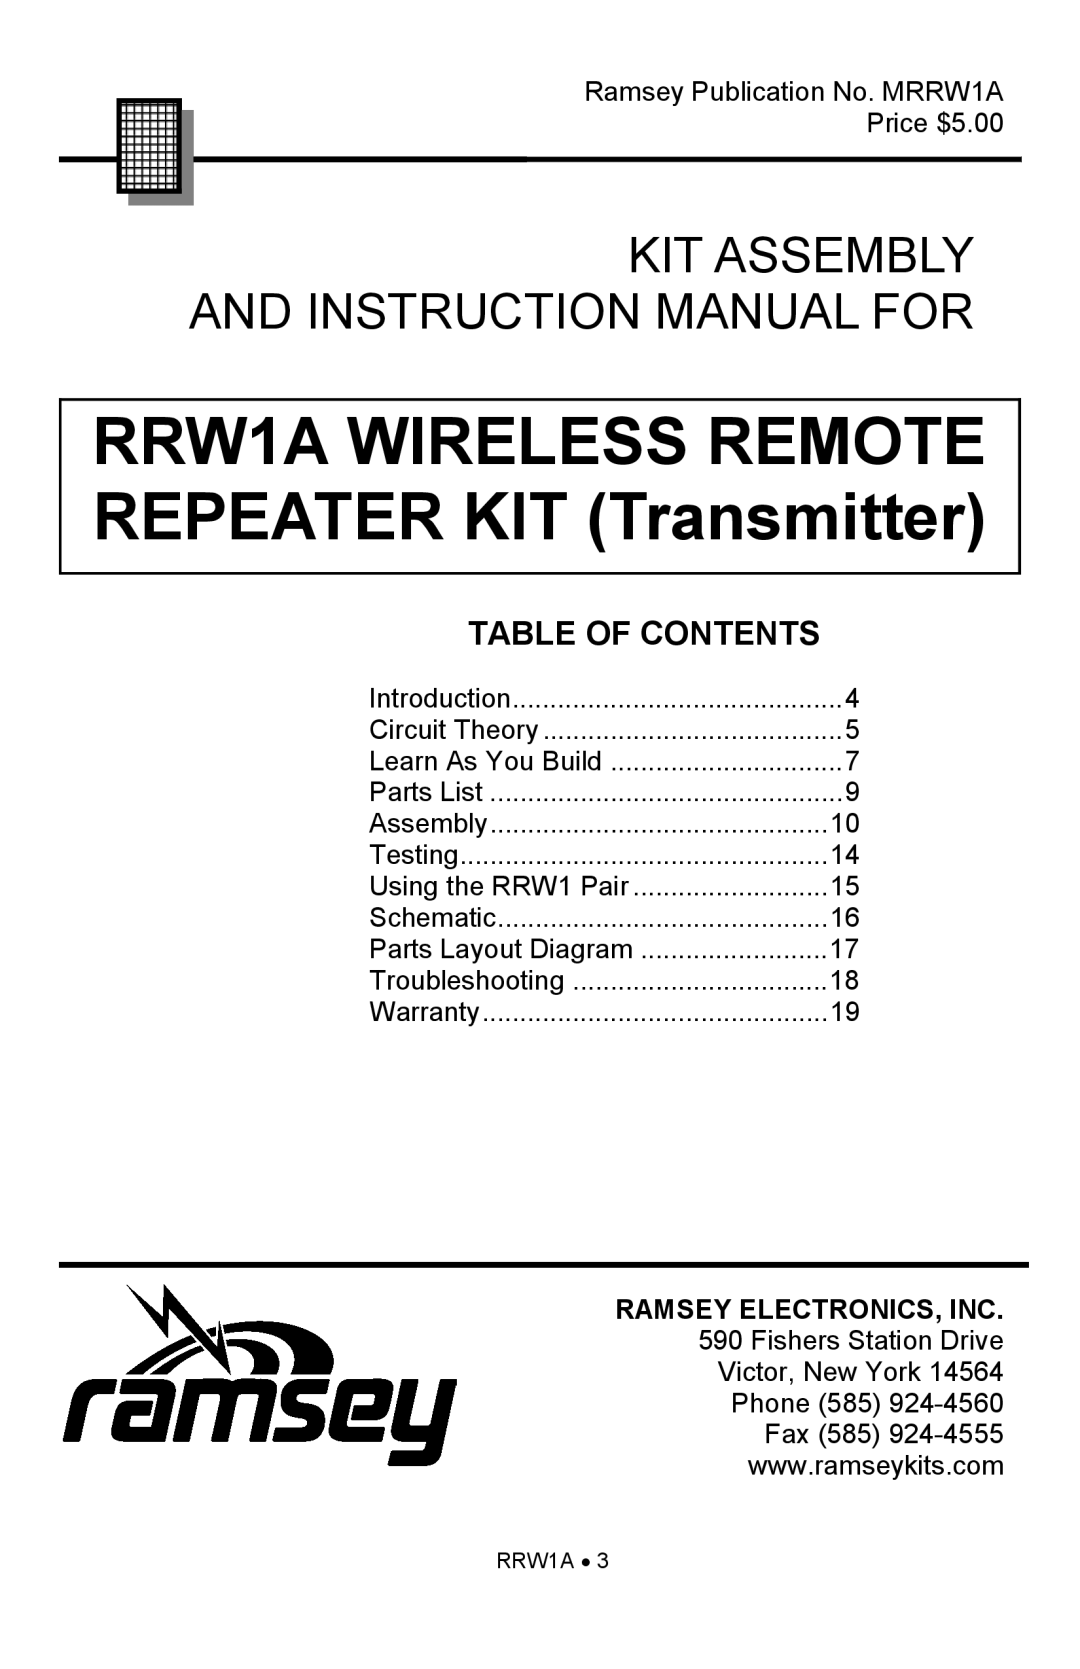 Ramsey Electronics manual RRW1A WIRELESS REMOTE REPEATER KIT Transmitter, Table Of Contents 